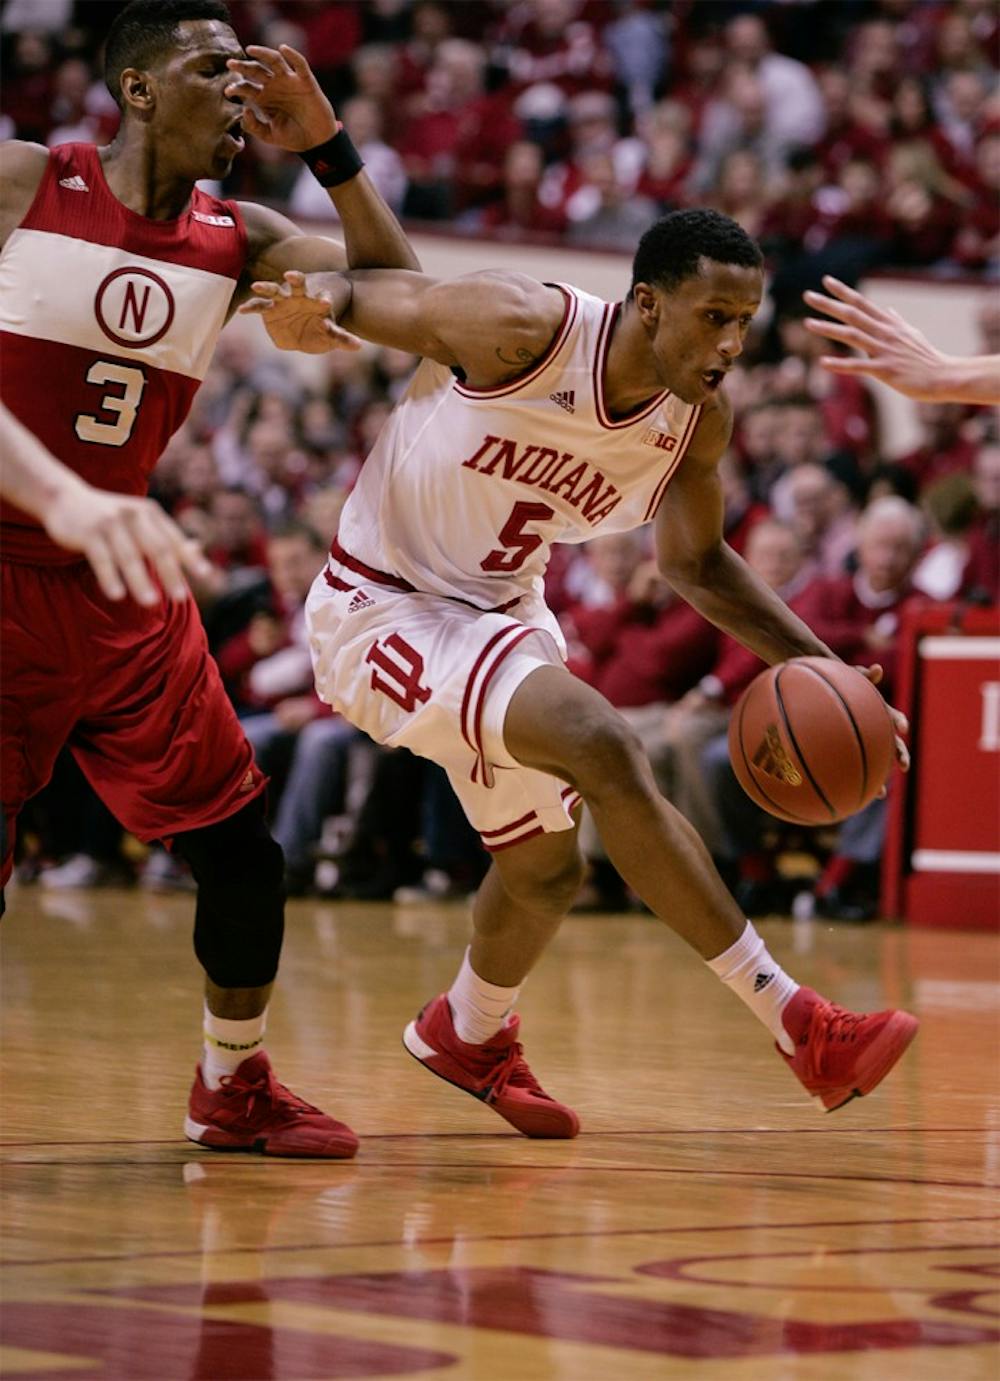 Junior forward Troy Williams dribbles the ball up the court against Nebraska. Williams led the Hoosiers in scoring with 18 points to help IU beat Nebraska 80-64 Wednesday at Assembly Hall.